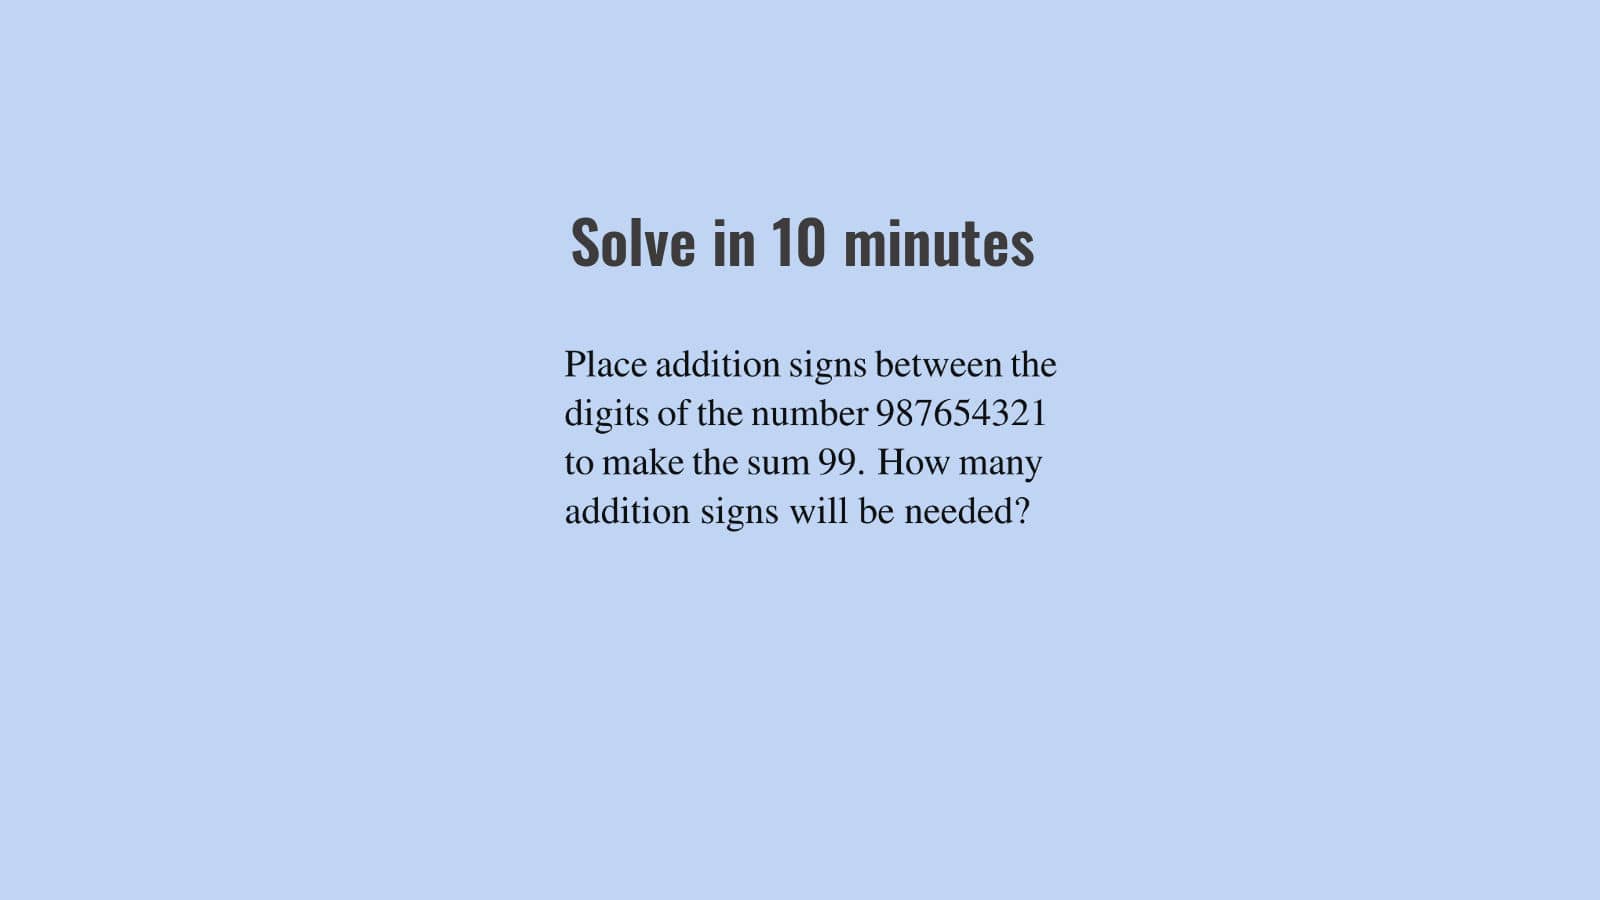 How many addition signs should be put between digits of 987654321